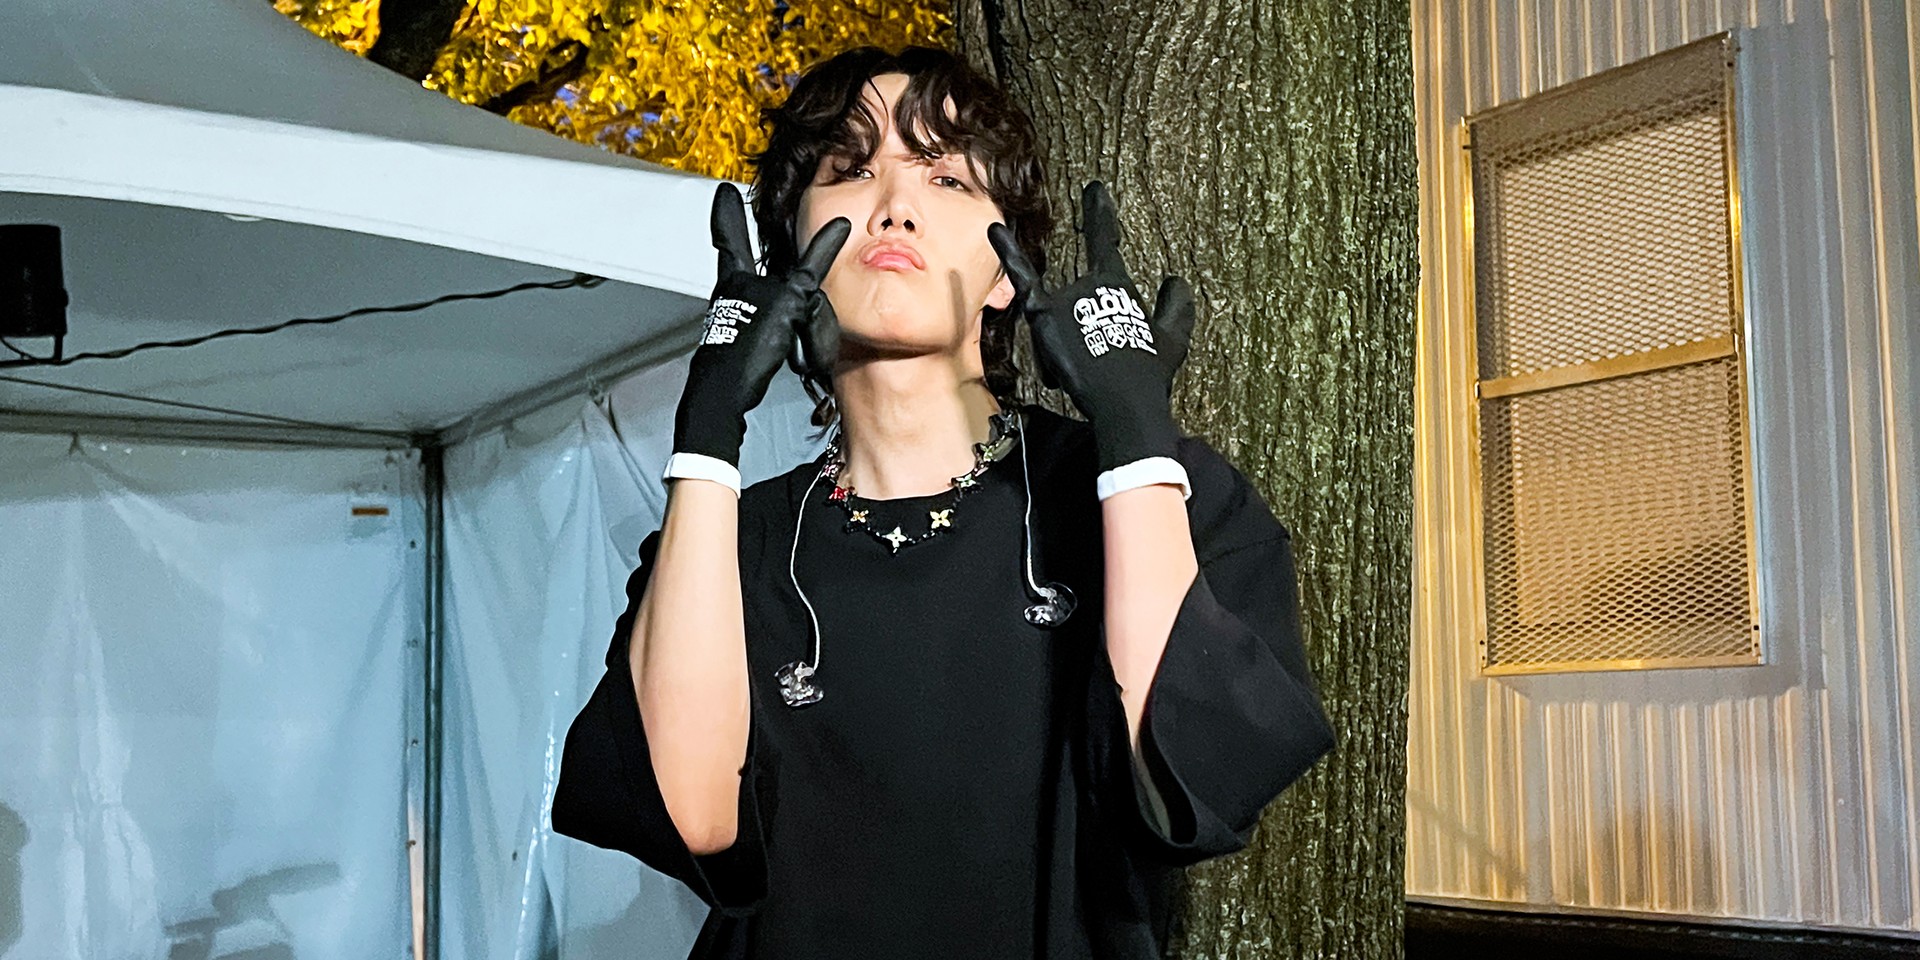 Lollapalooza on X: History was made. Congratulations #jhope for being the  first South Korean artist to headline the main stage of a major U.S. music  festival. 💜 #Hobipalooza #Lollapalooza #Lolla  /